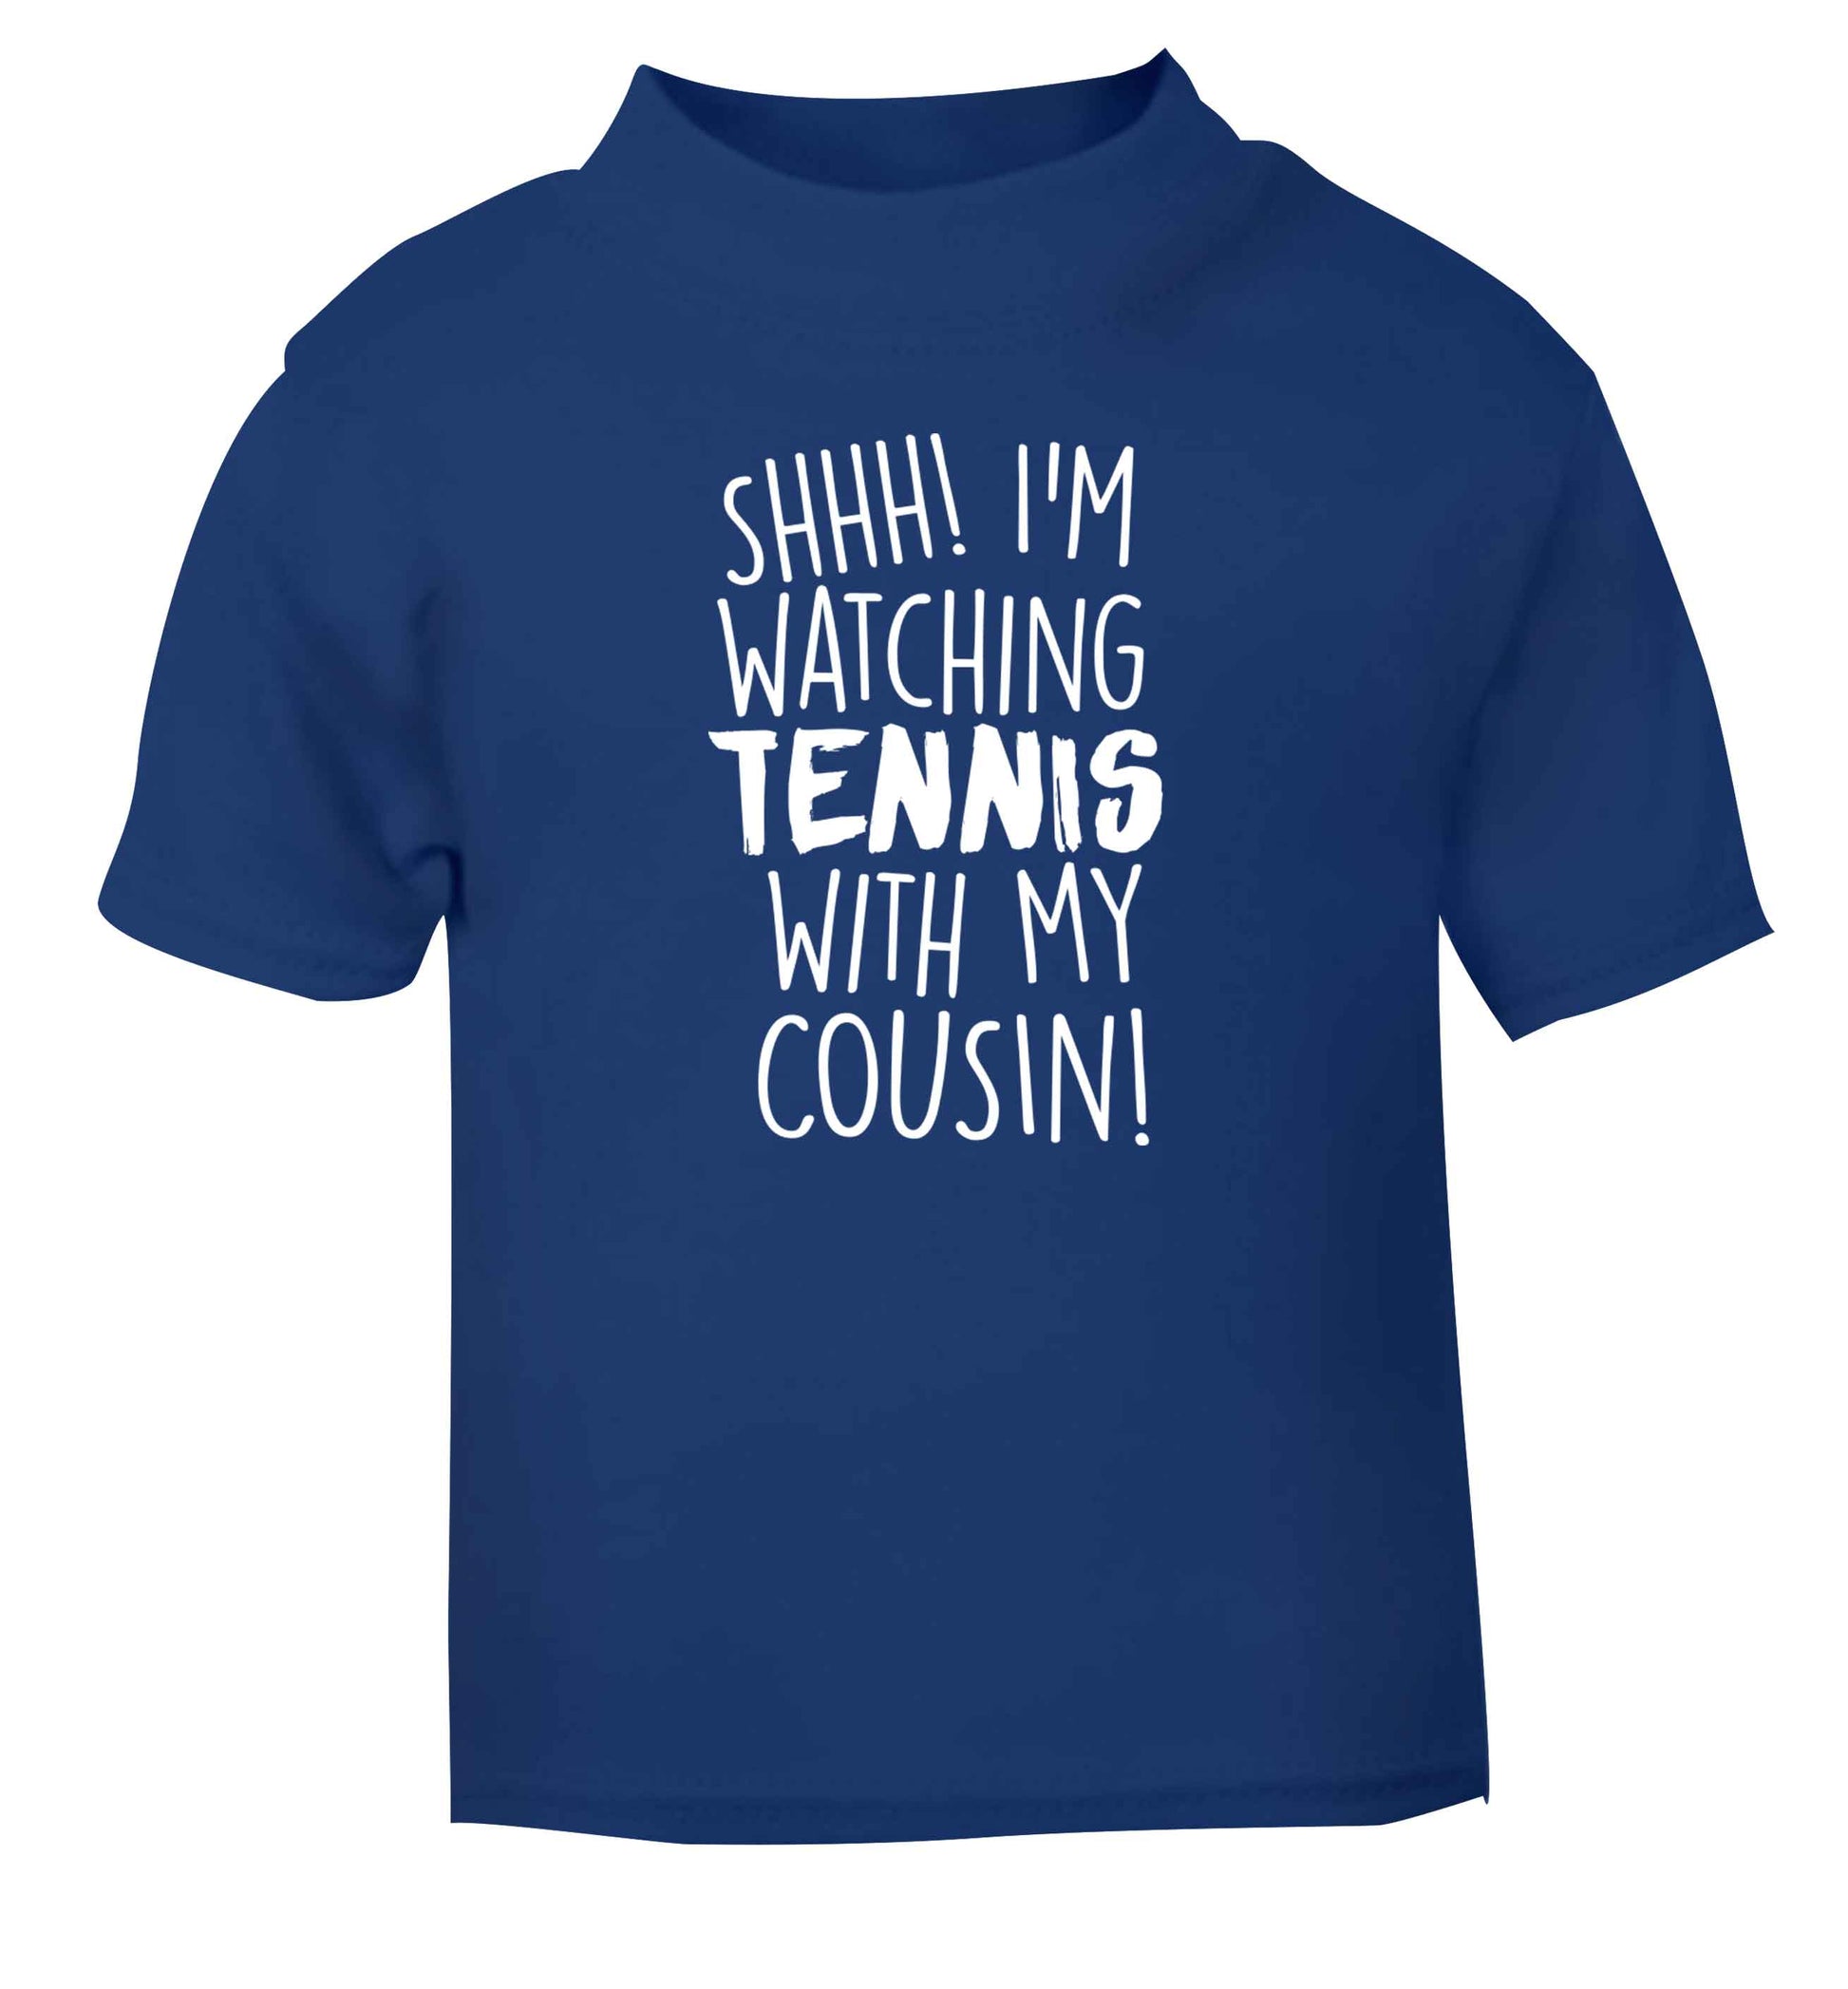 Shh! I'm watching tennis with my cousin! blue Baby Toddler Tshirt 2 Years